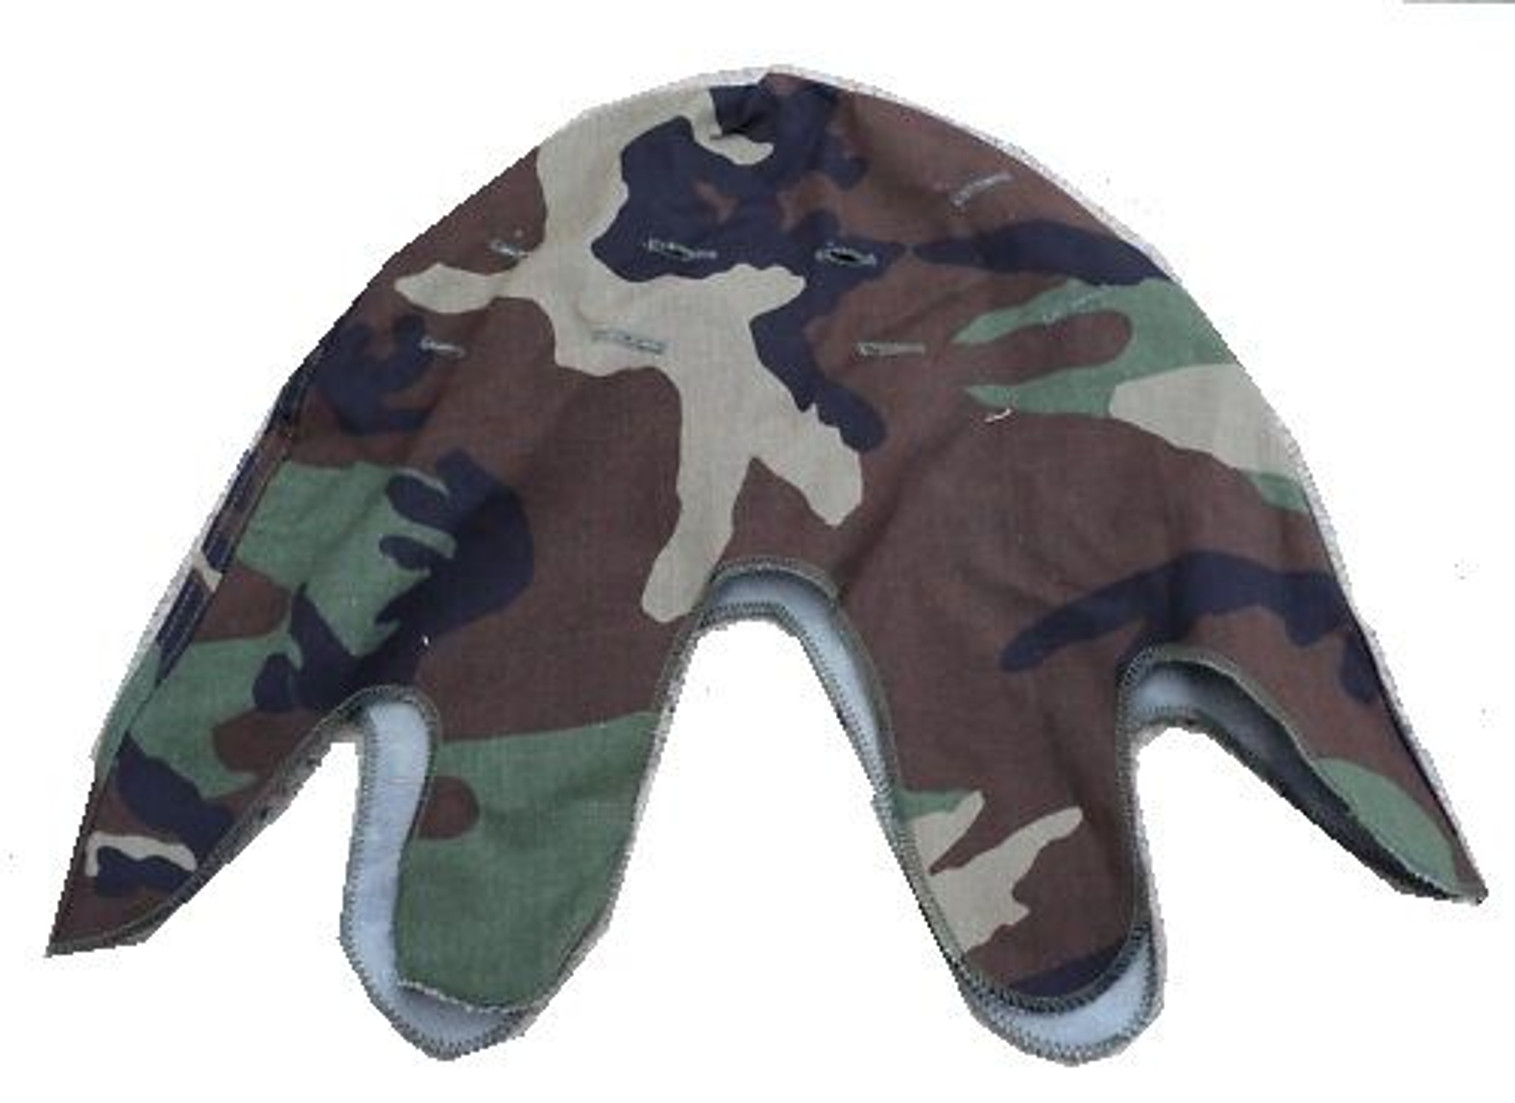 US Armed Forces M1 Steel Pot Helmet Cover - Woodland Camo - New